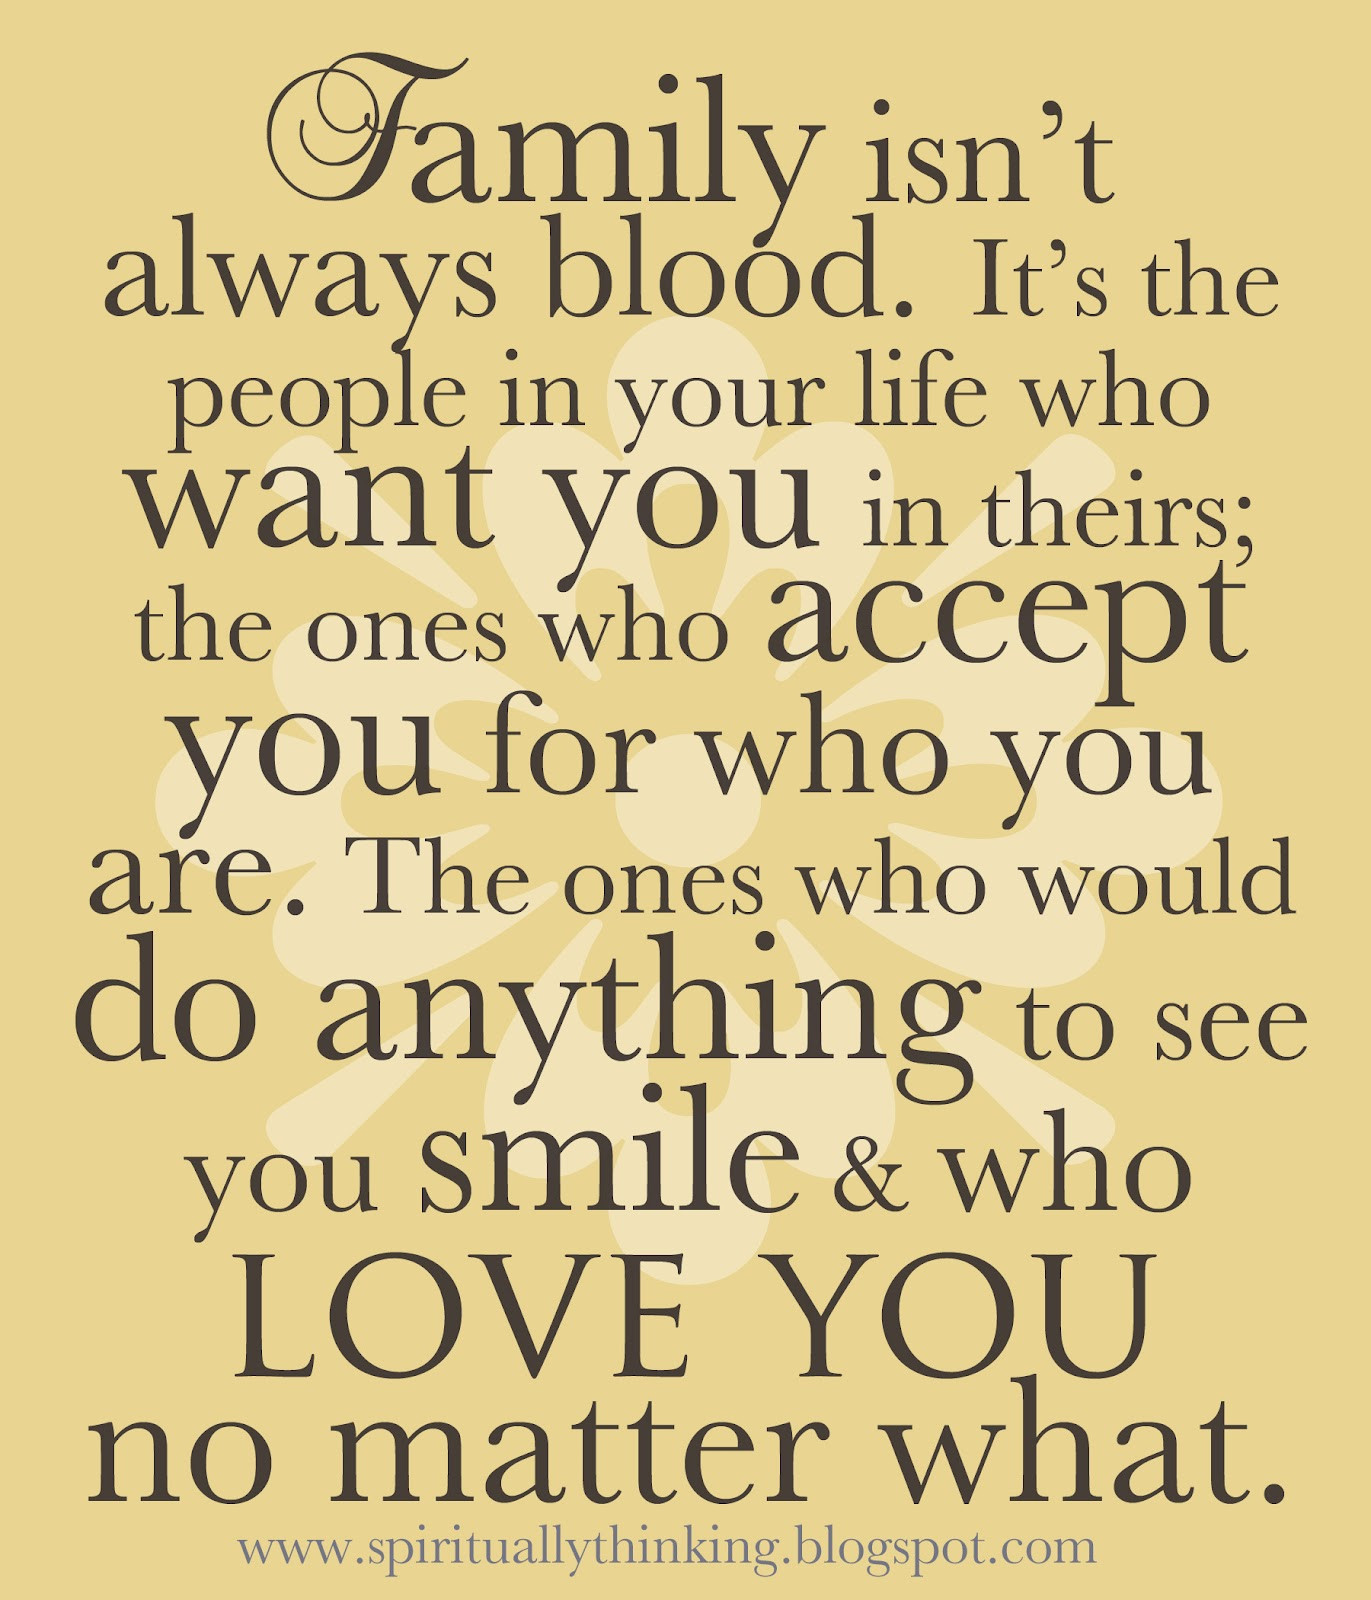 Quotes About Friendship And Family
 Quotes About Friends Being Family QuotesGram